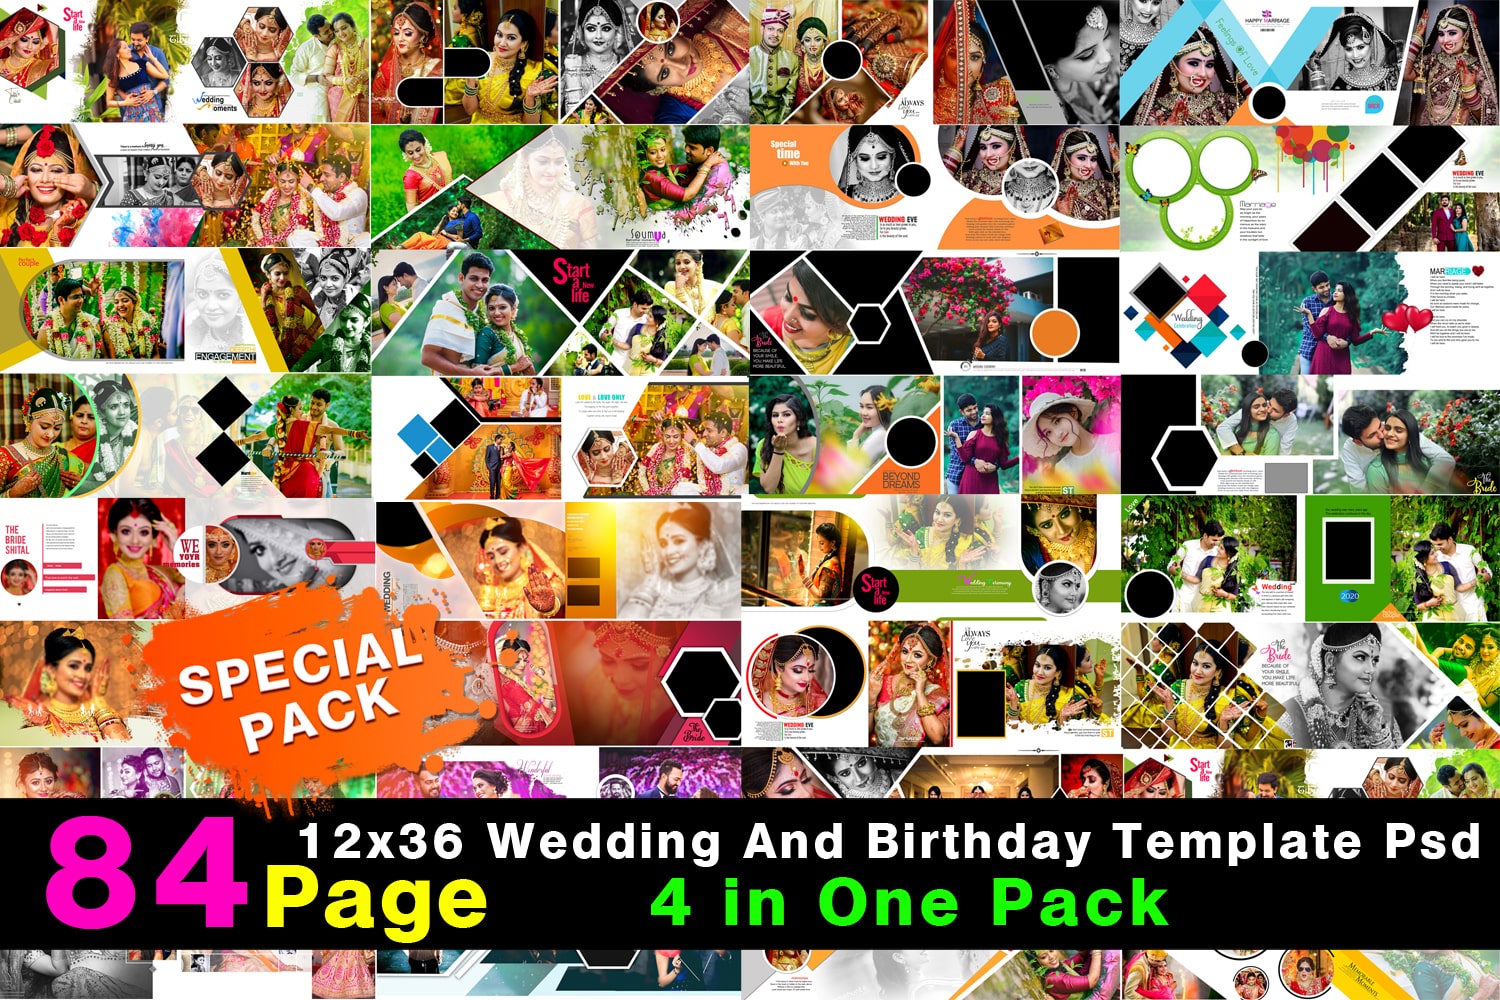 Download Pack8 Wedding And Birthday Album Template Psd 2021 4 In One Pack 84 Page Eodia